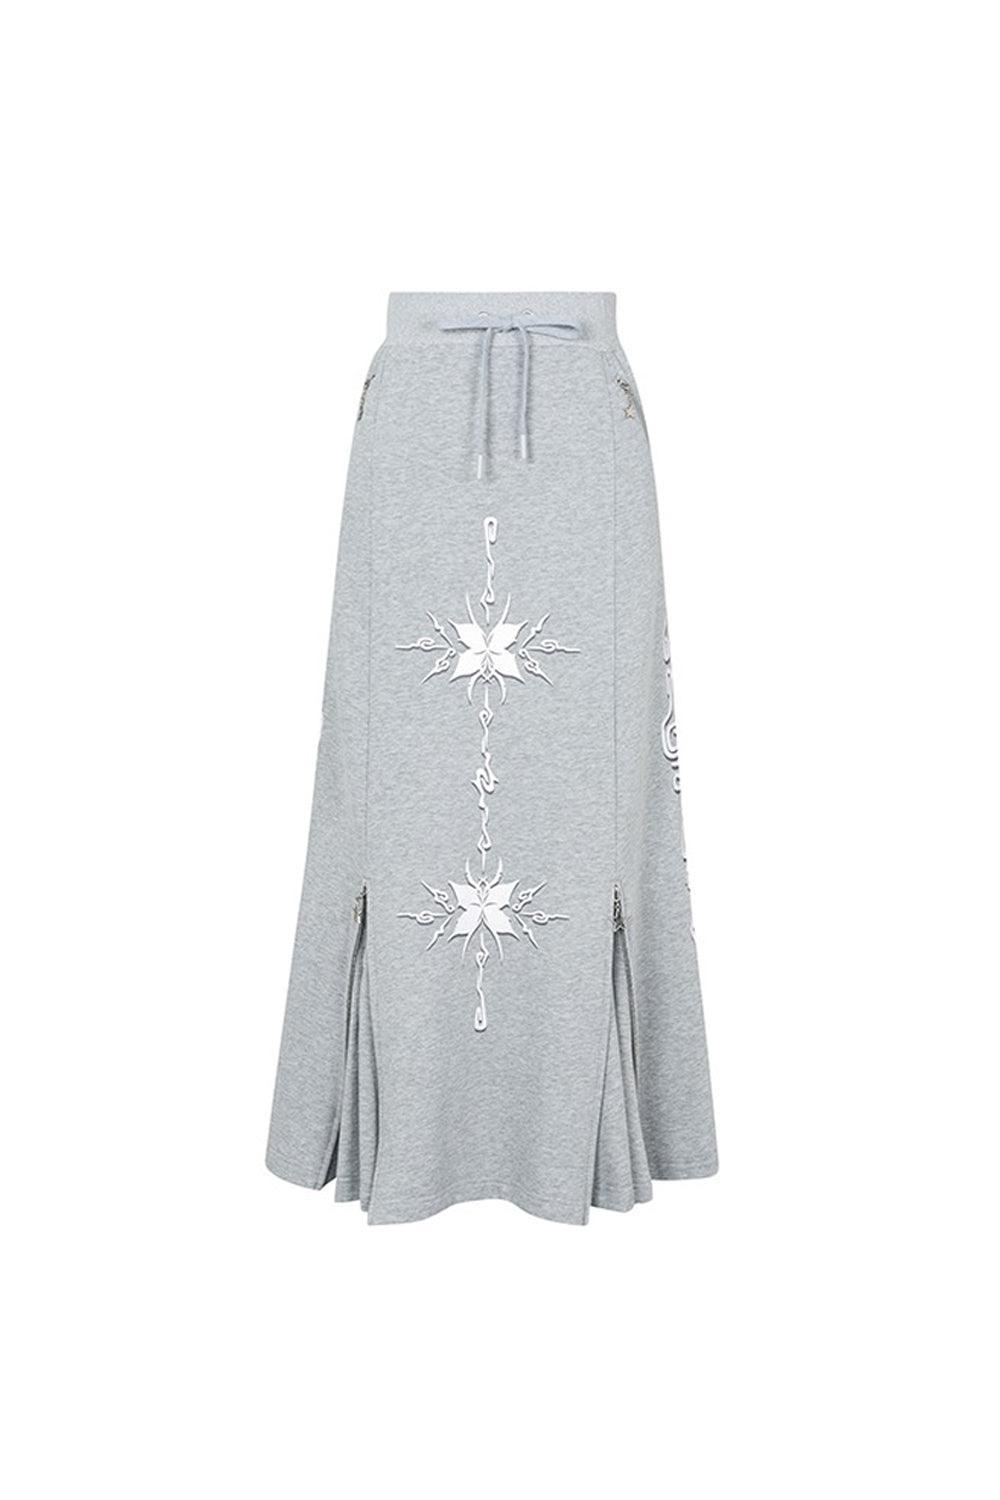 Long Snowflake Skirt with Zippers - Pixie Rebels